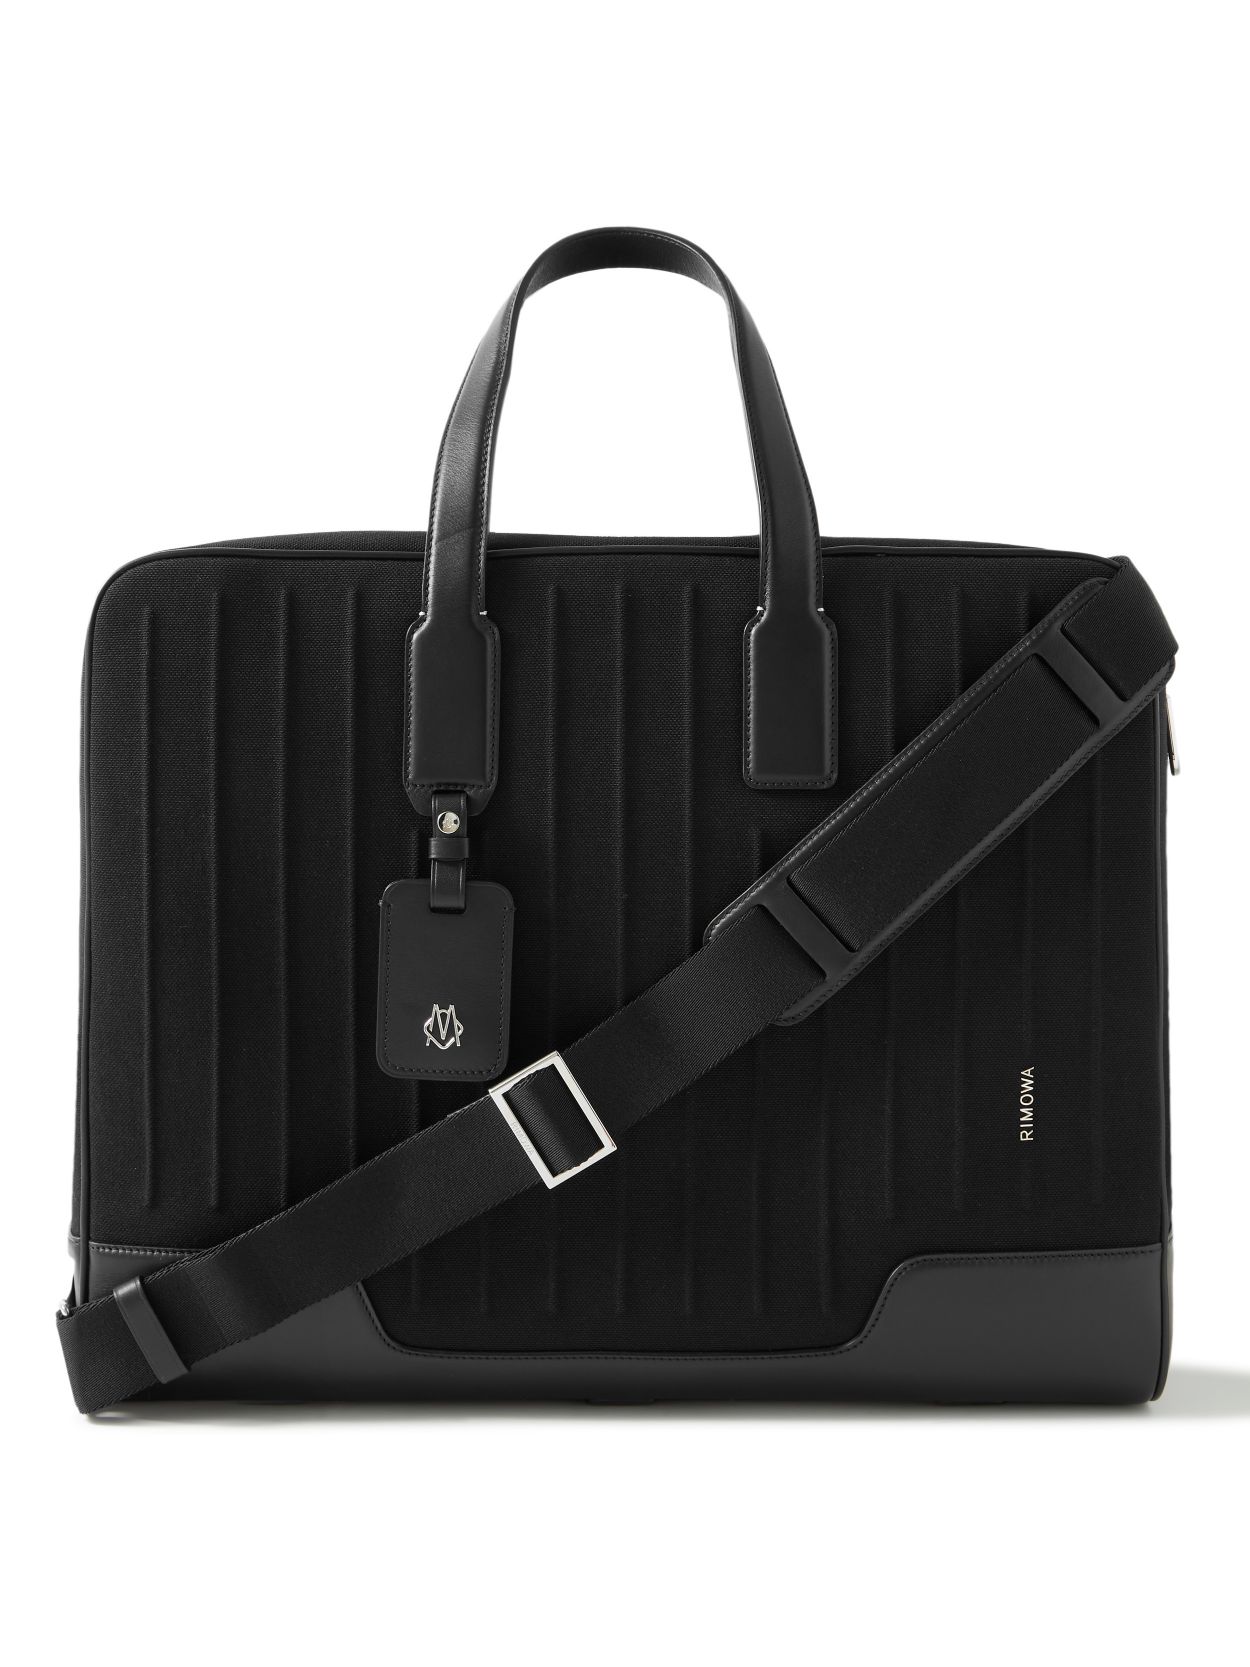 Mr Porter adds German luggage brand Rimowa to collection | Esquire ...